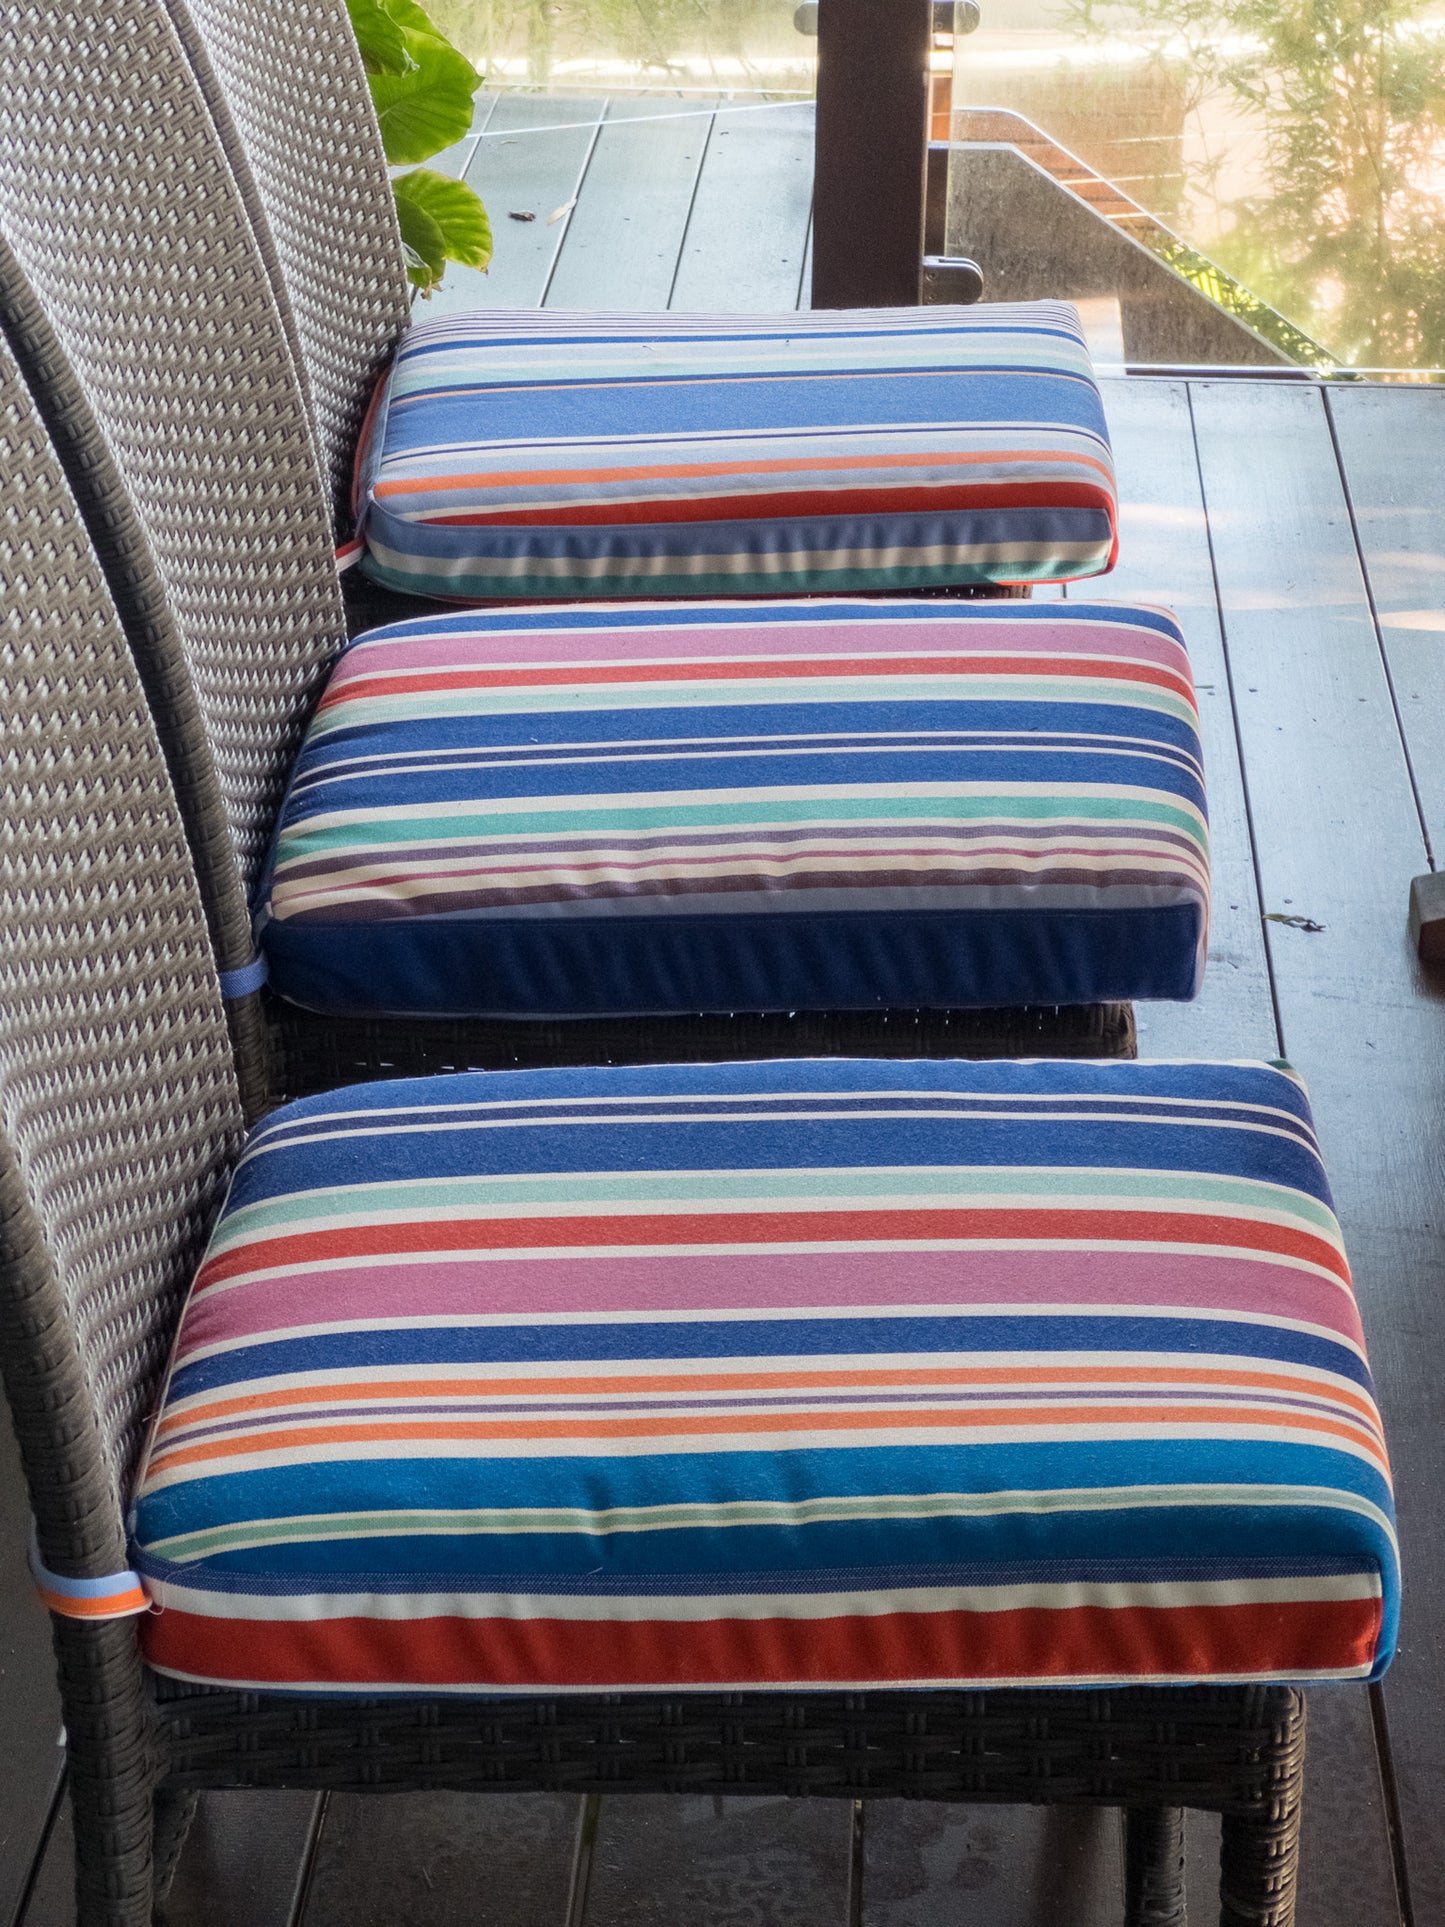 Outdoor Canvas Cushions in Les Toiles Fabric